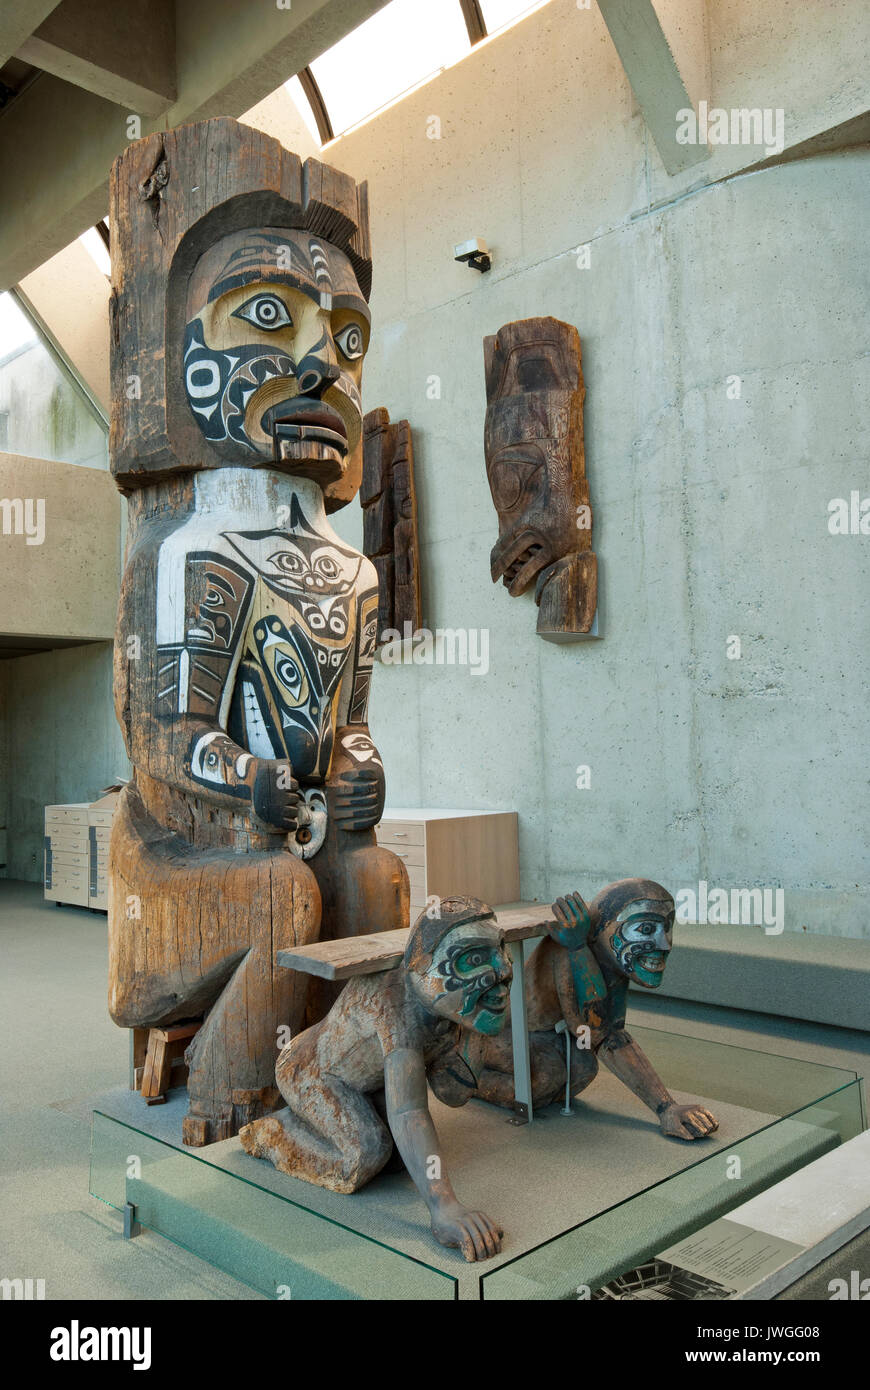 Sculpture carved by Kwakwaka'wakw artist George Nelson, Museum of Anthropology, Vancouver, British Columbia, Canada Stock Photo